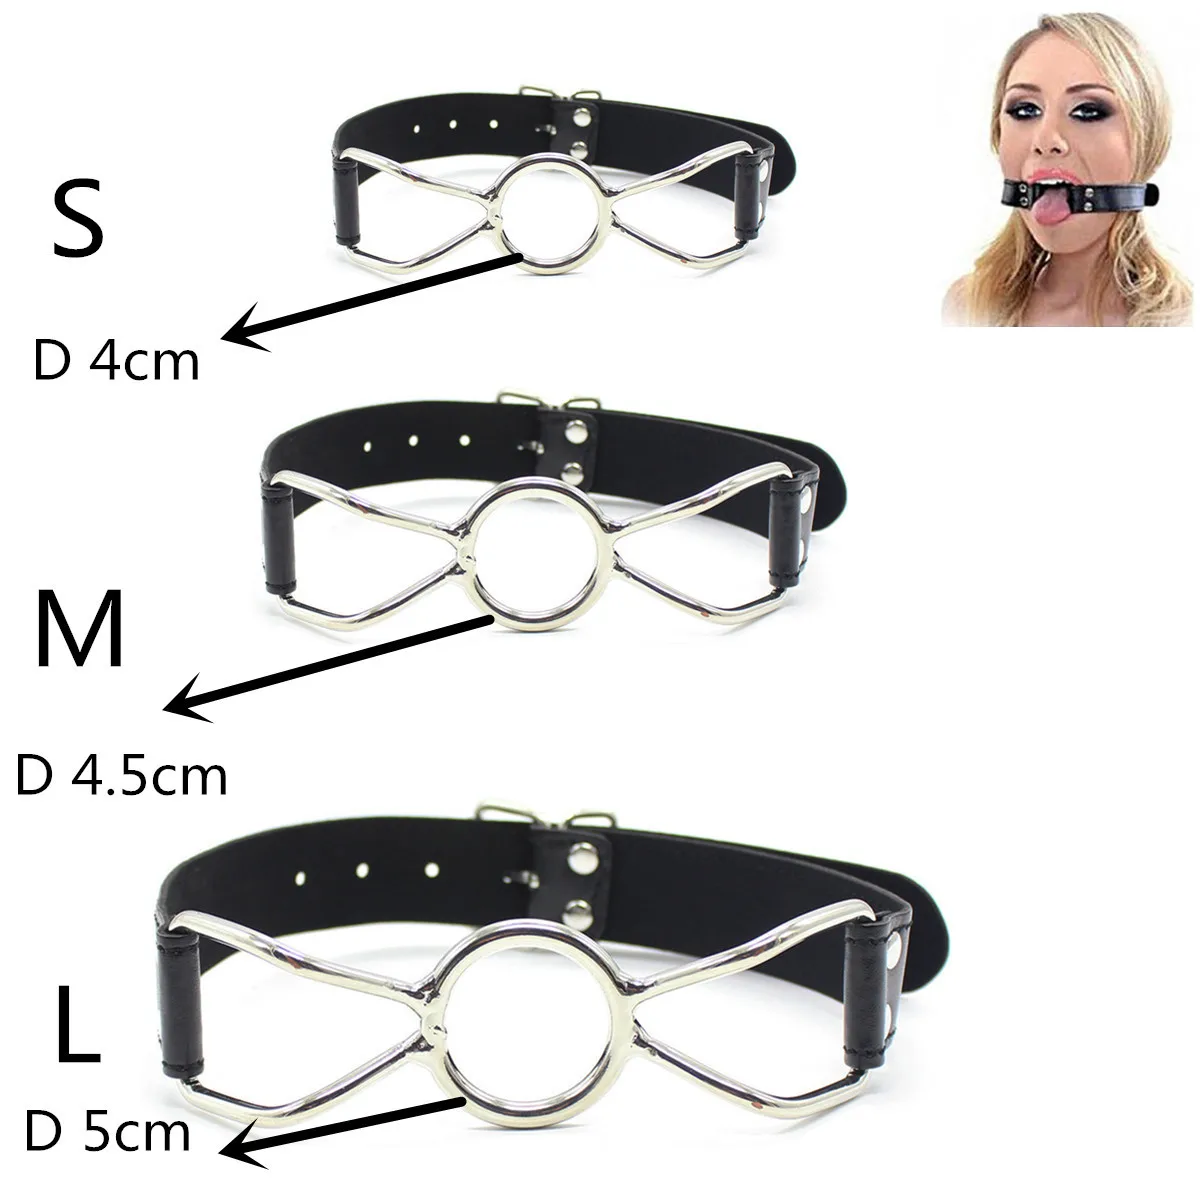 Erotic Sexy Toys O Ring Gag , Flirting Tool Silicone Open Mouth Gag Slave BDSM Adult Games Sex Products For Women or Gay